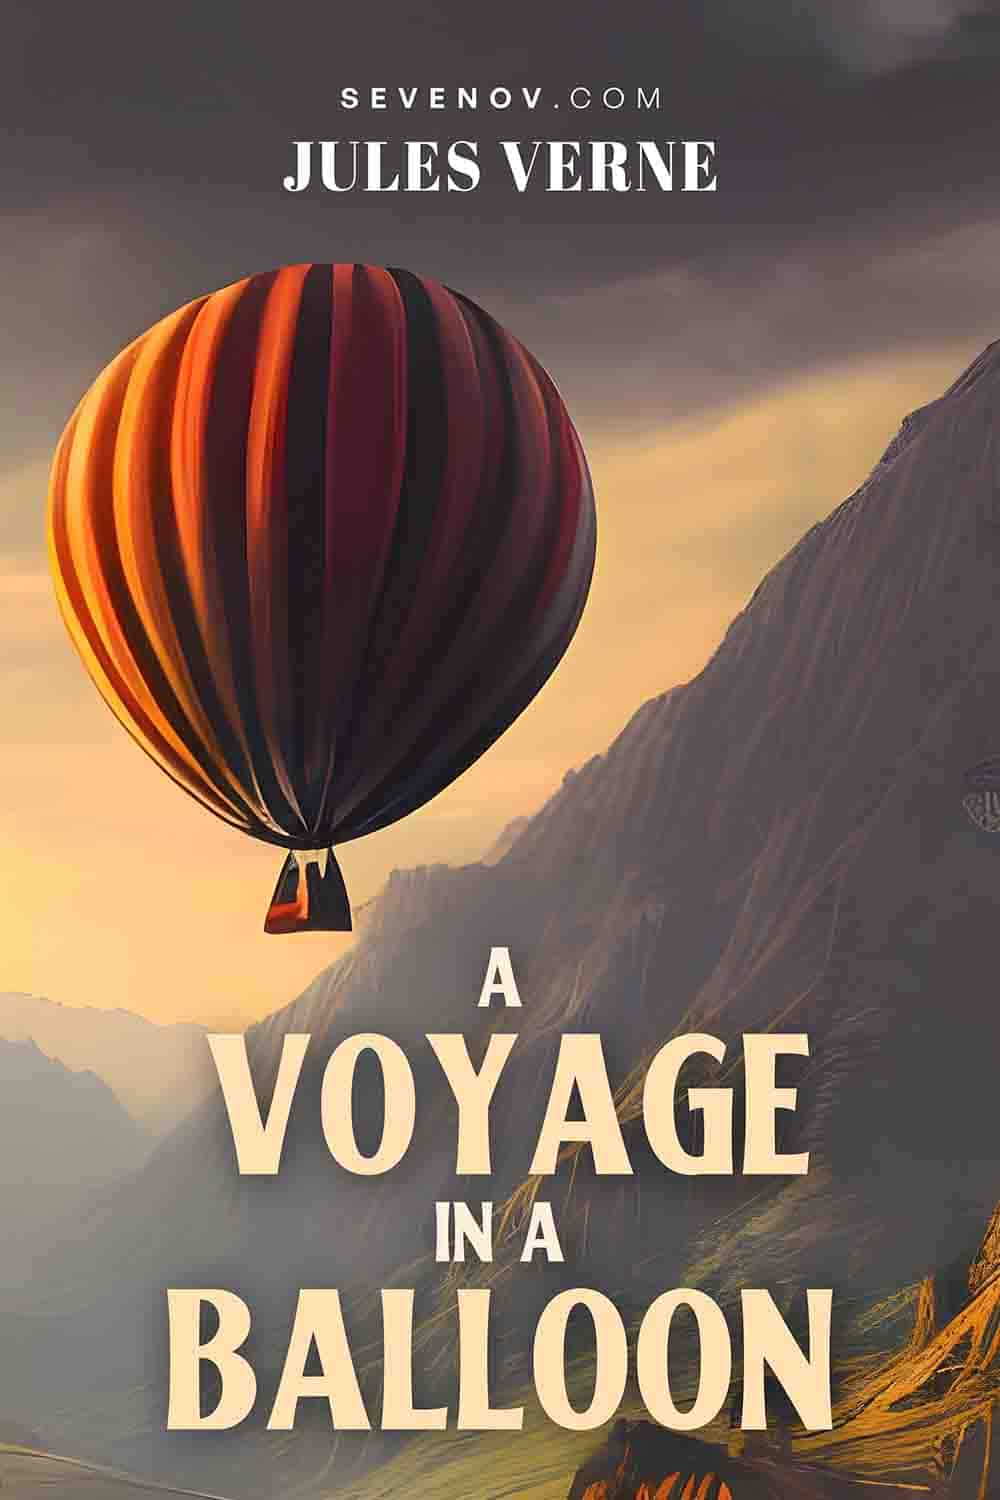 https://pagevio.com/wp-content/uploads/2023/02/a-voyage-in-a-balloon-20230213.jpg